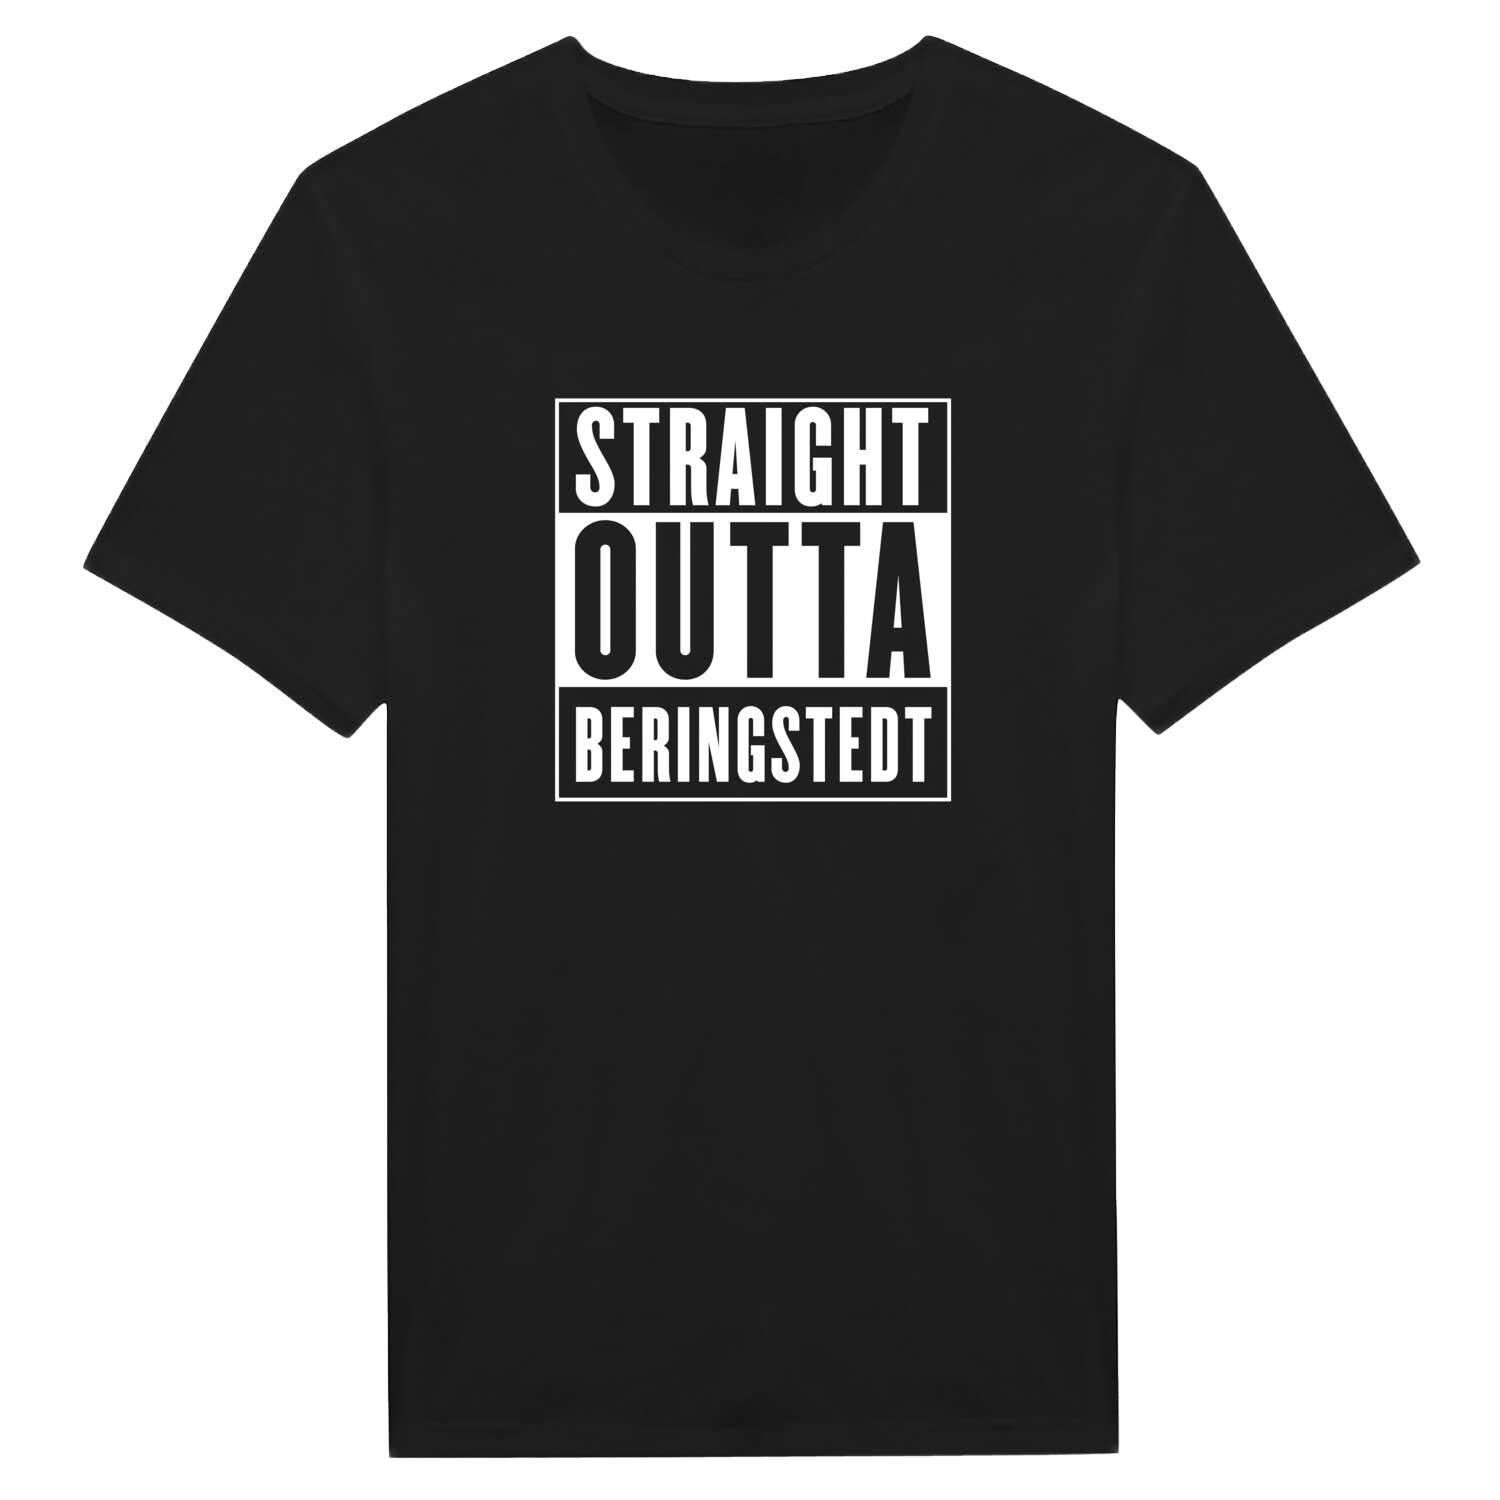 Beringstedt T-Shirt »Straight Outta«